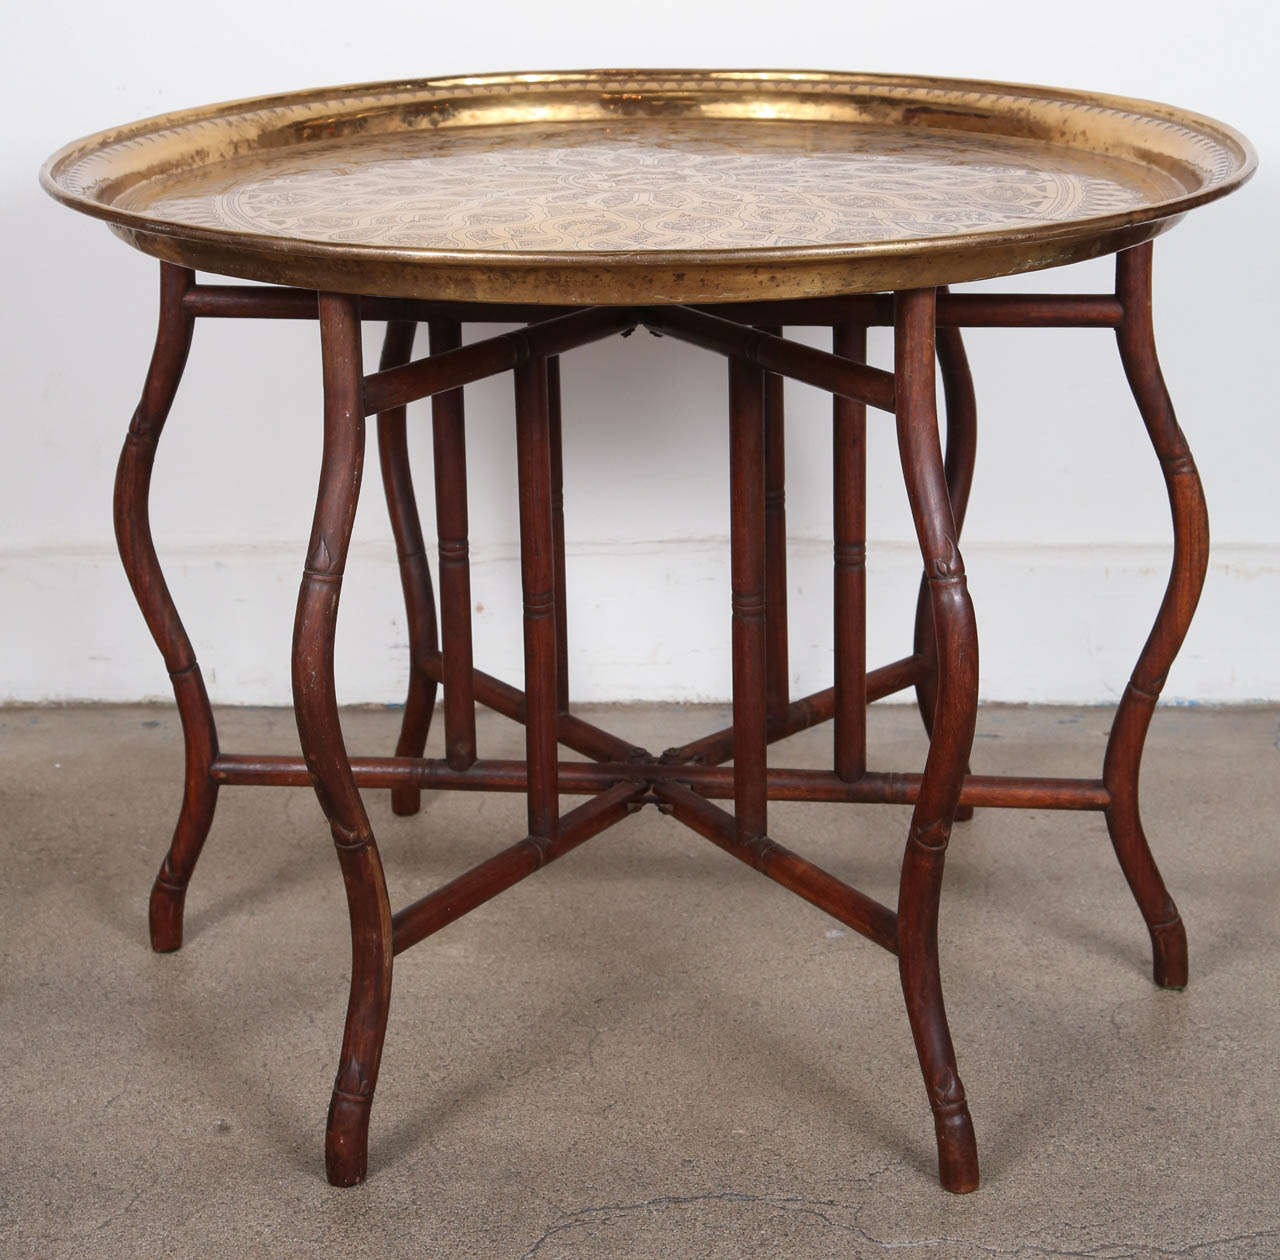 Very hard to find large Persian polished brass tray table on bamboo folding base, could be use as a coffee table or low dining table, this is how they use them in Morocco, Syria, India, Egypt and in the Middle East to serve food or tea.
Great for